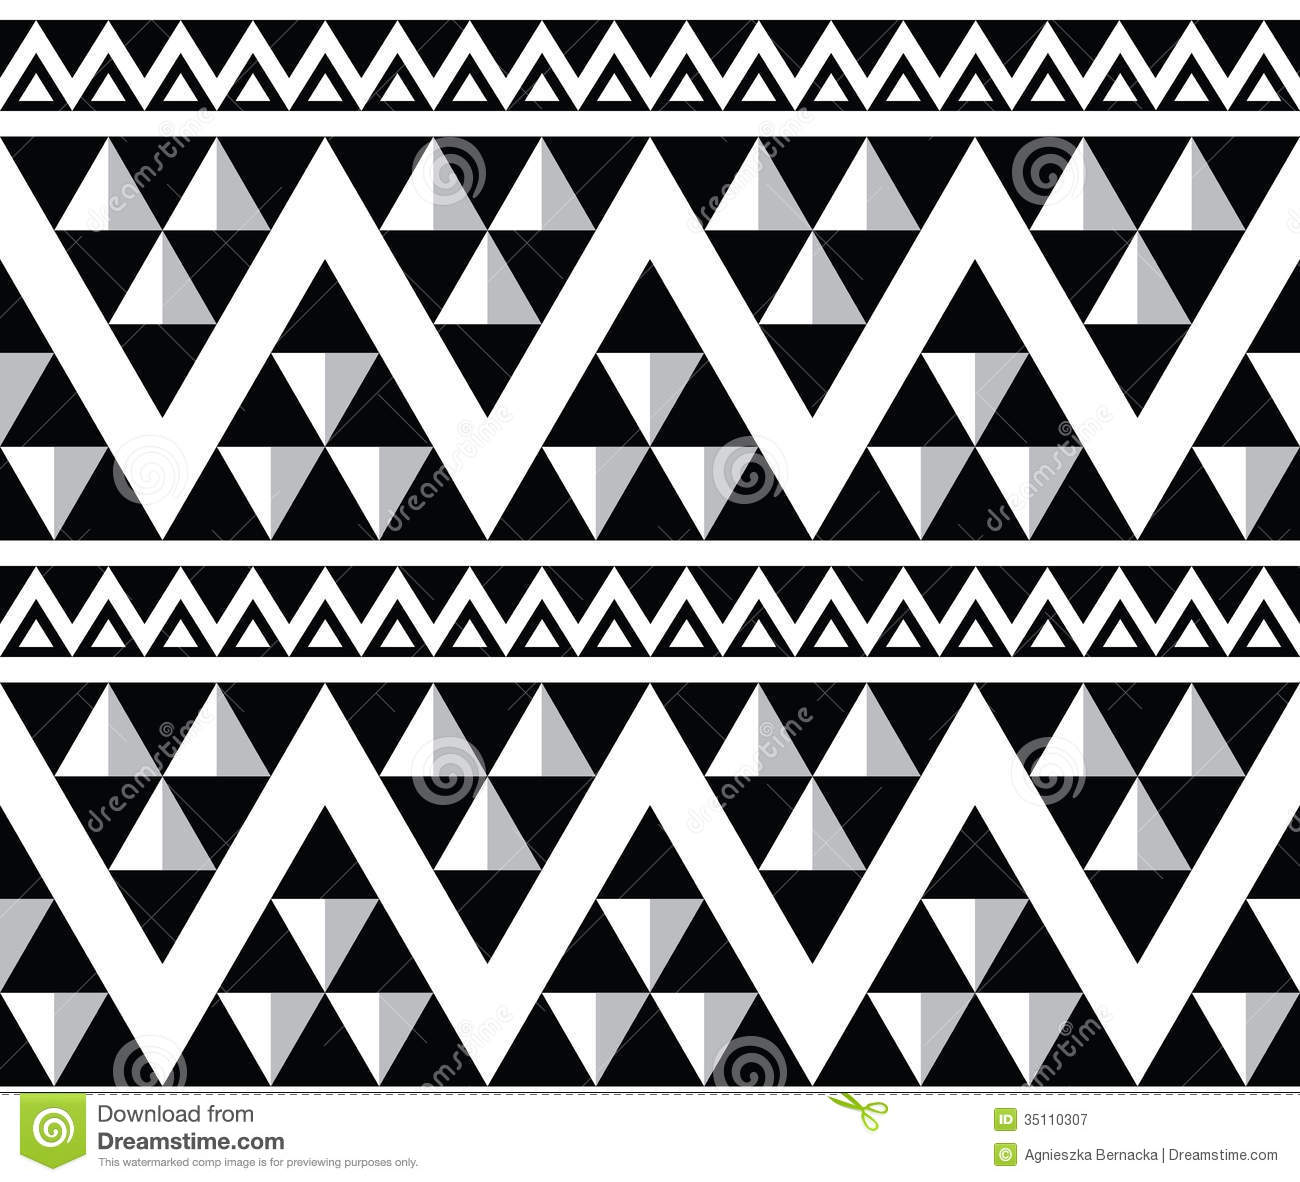 Aztec Tribal Pattern Black and White